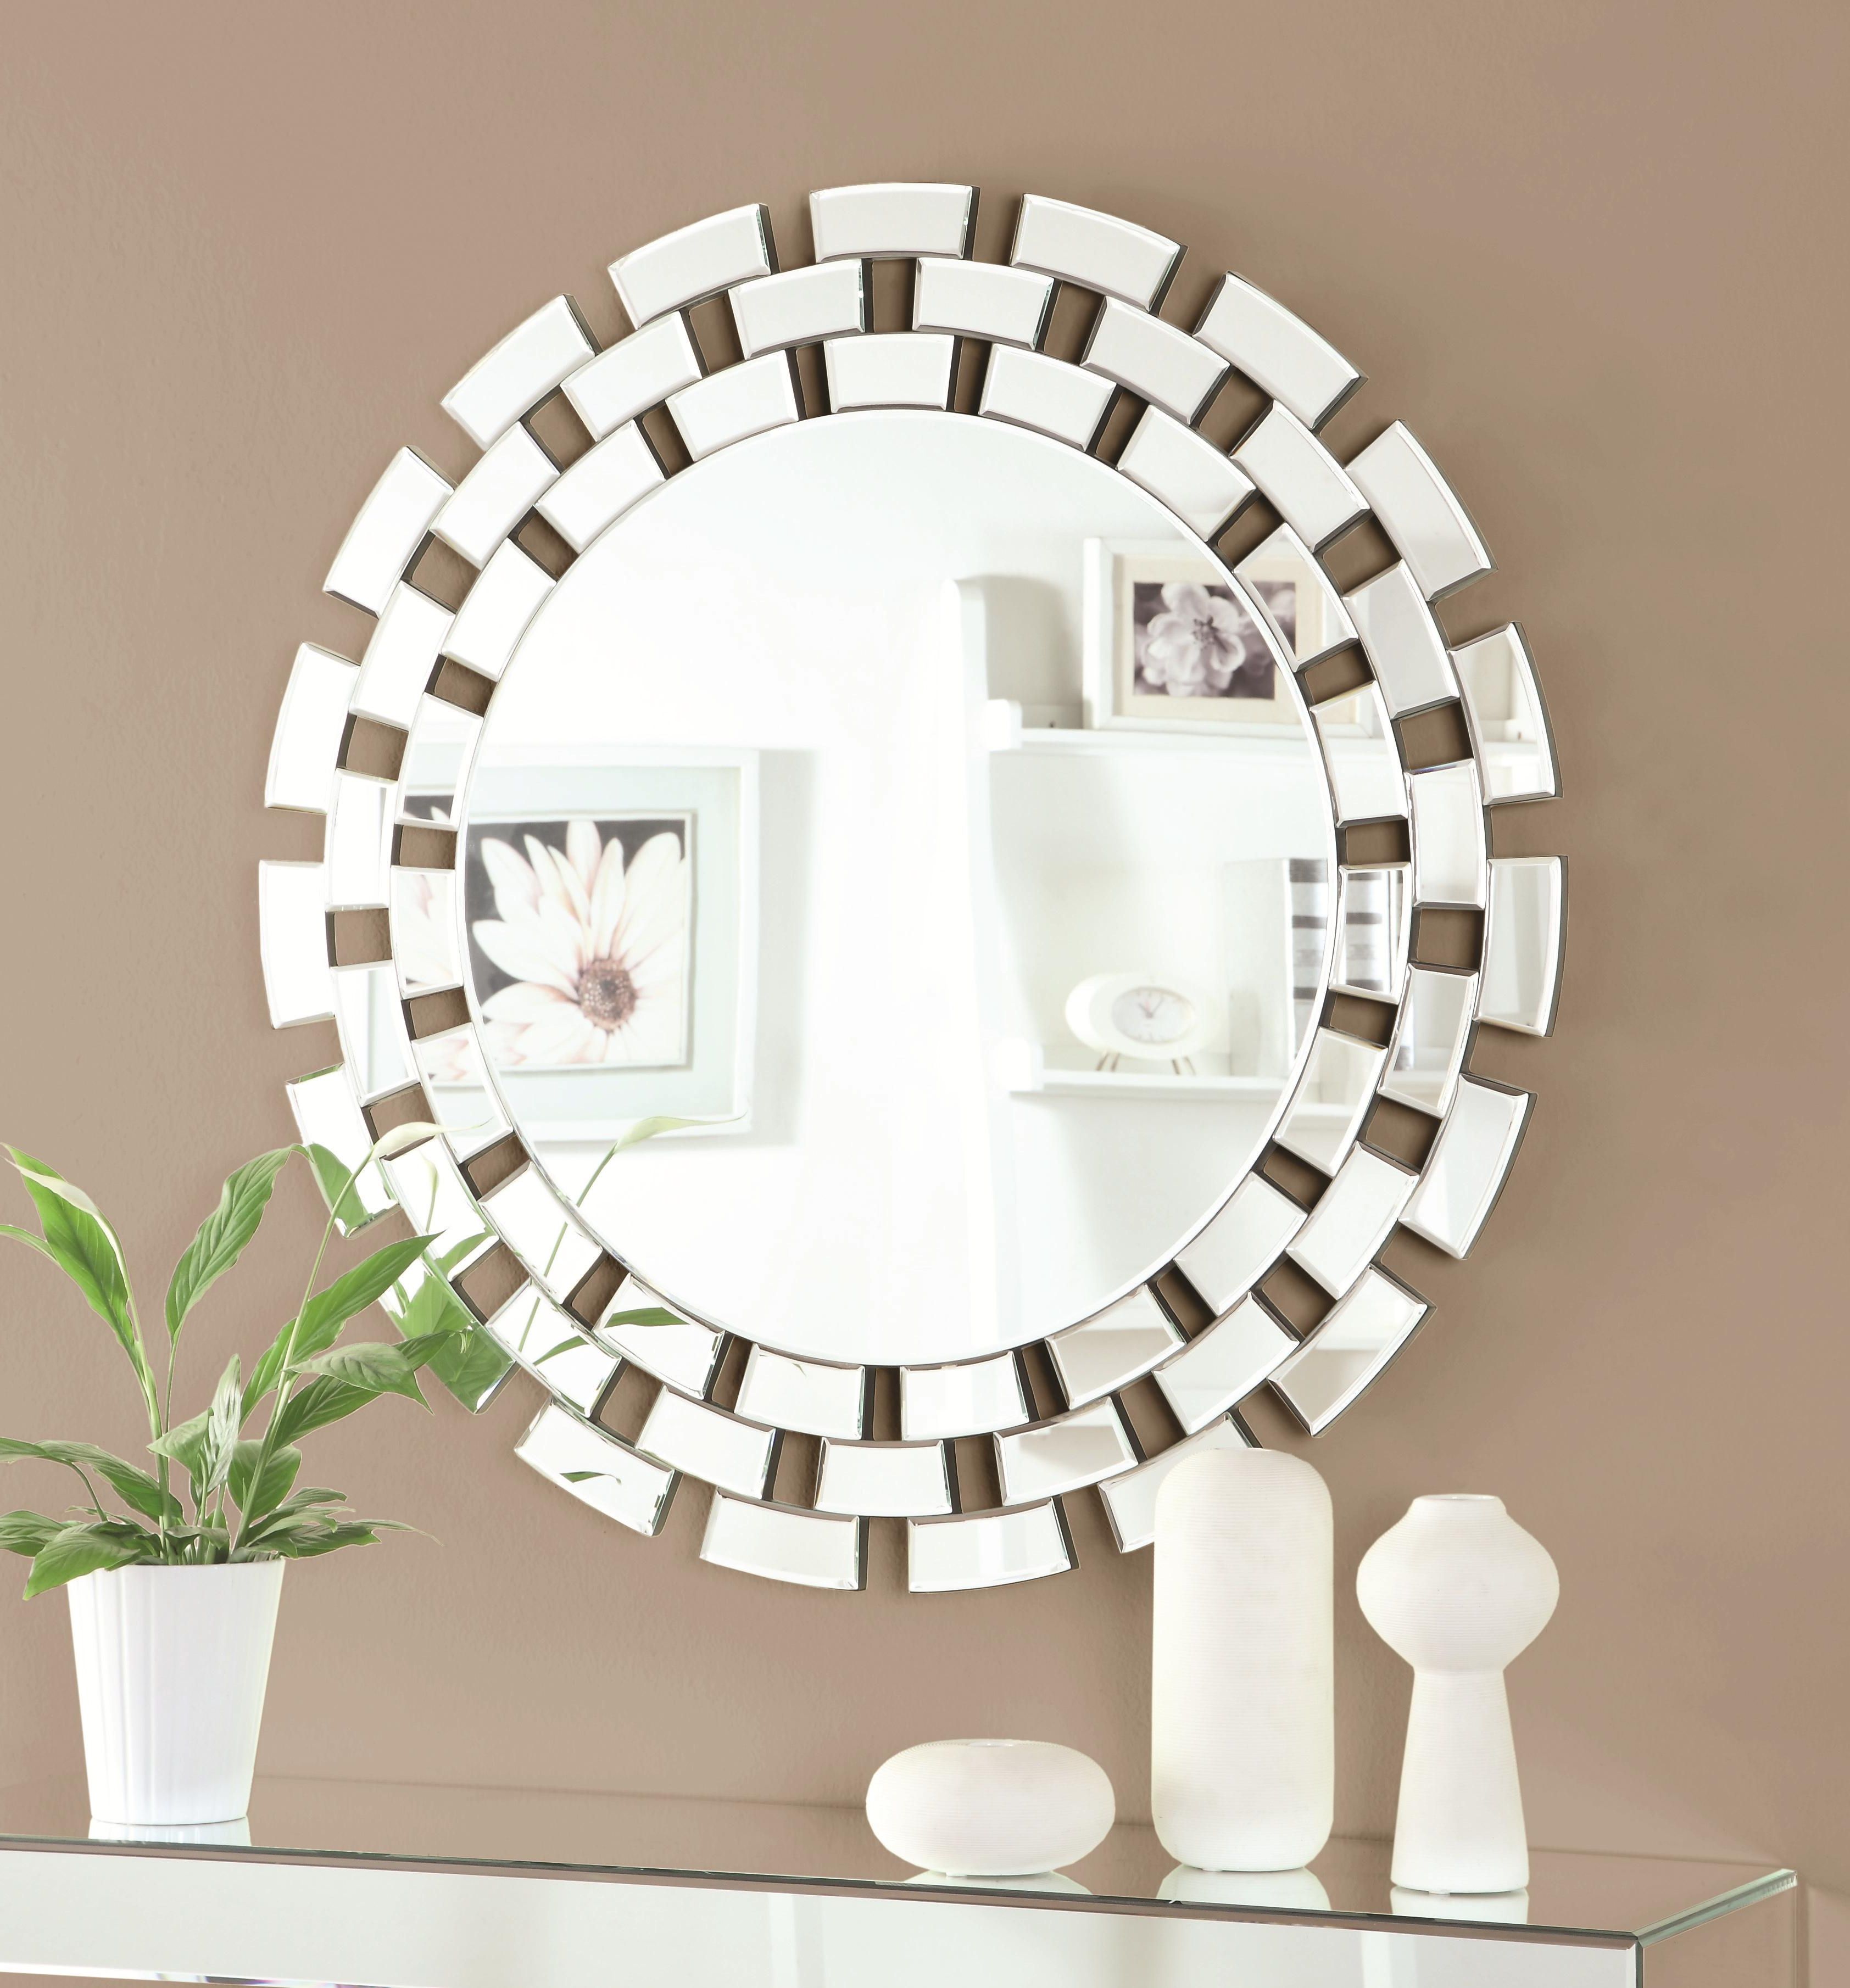 Accent Mirrors Intended For Widely Used Accent Mirrors Round Wall Mirror With Geometric Frame (View 4 of 20)